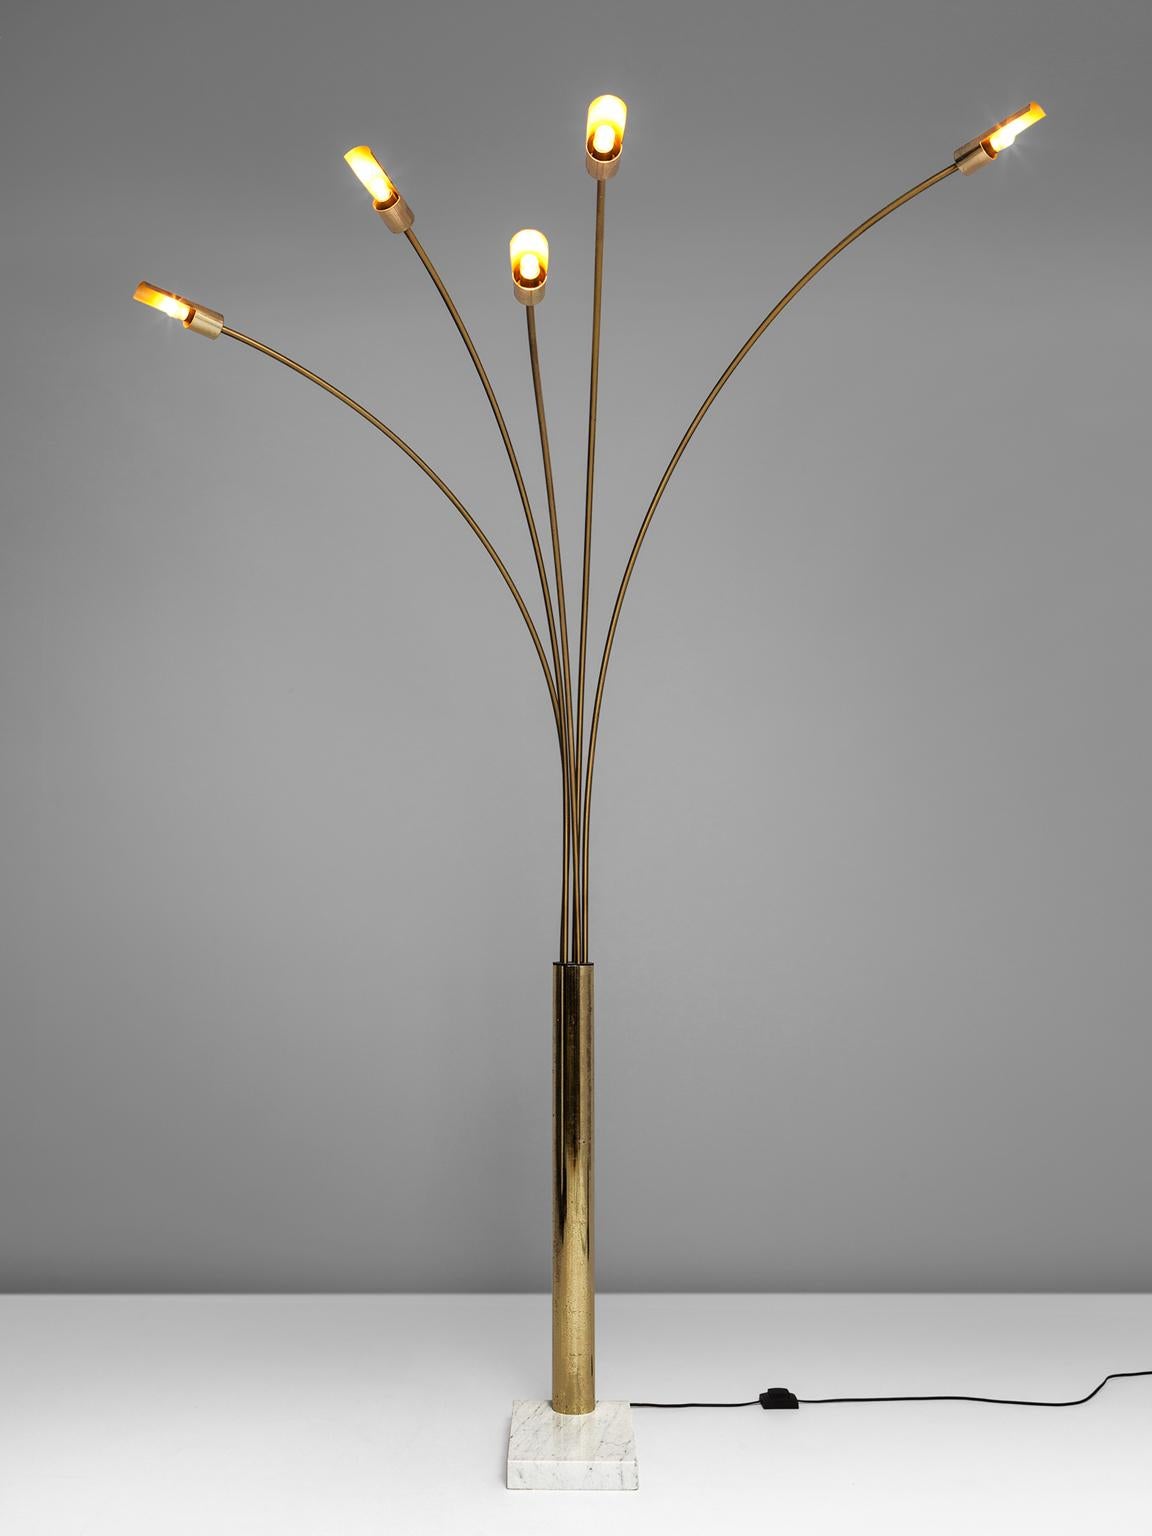 Floor lamp, marble and brass, Italy, 1950s.

This biomorphic floor lamp features a rectangular marble base with a patinated brass stem and five separate stems that 'sprout' from the main pole. The bottom of the lamp as made out of a thicker brass